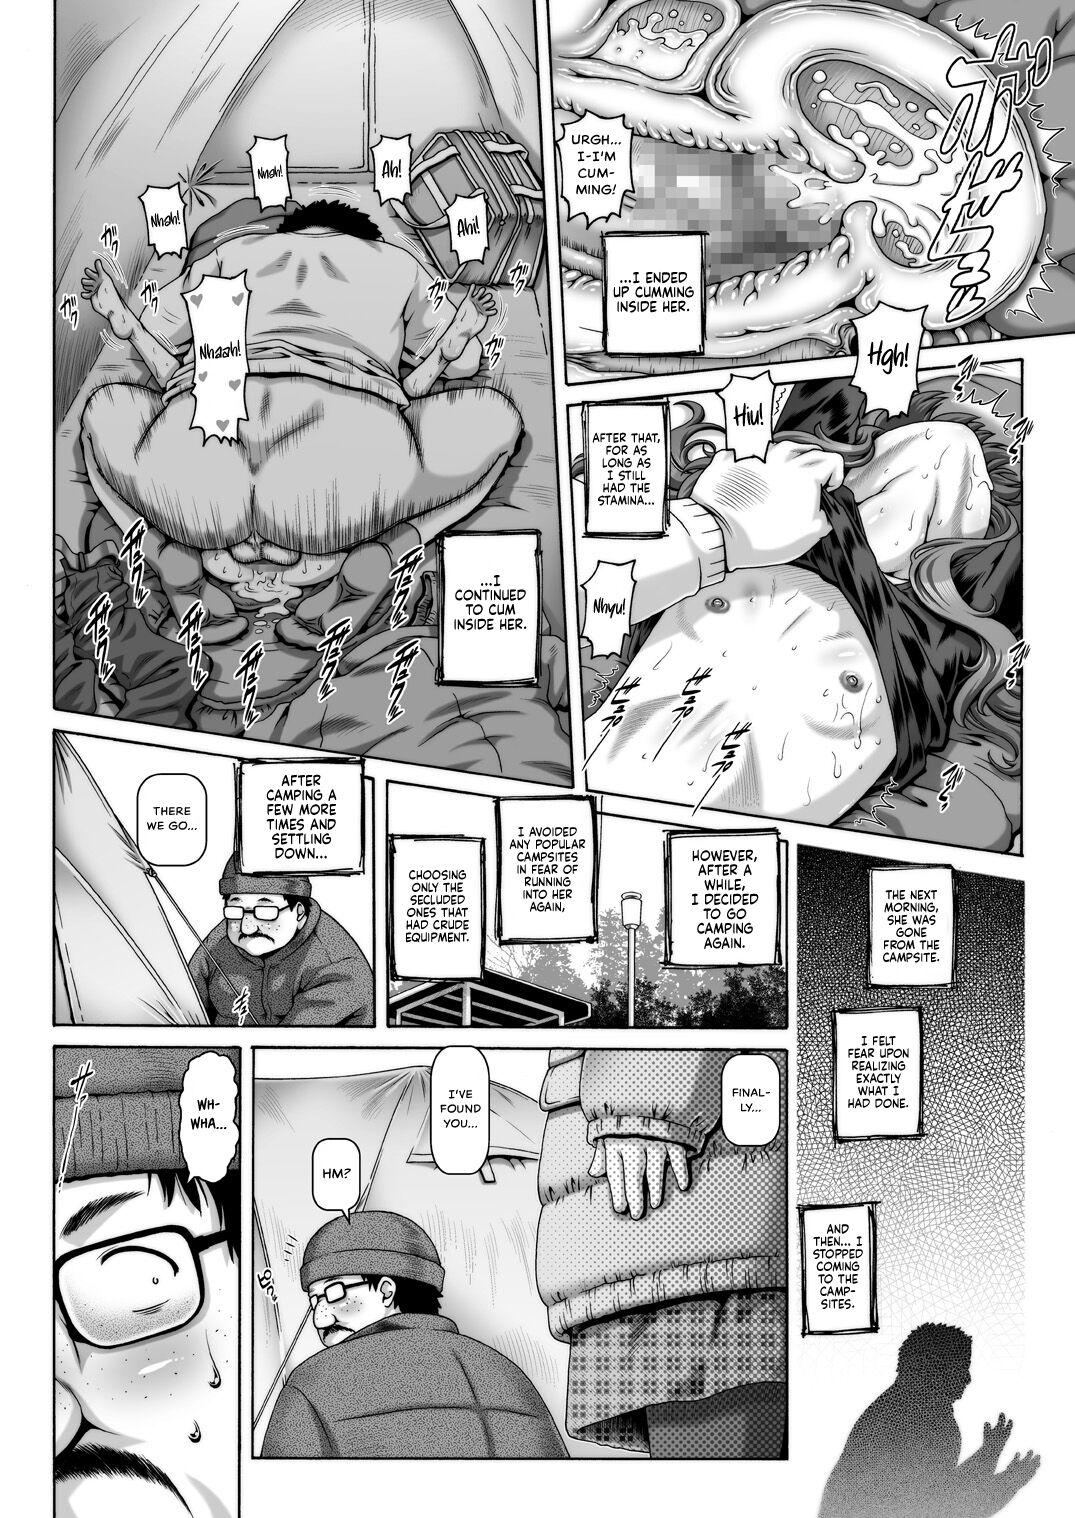 Farting EMPIRE HARD CORE 2021 SPRING - Yuru camp | laid back camp French - Page 10